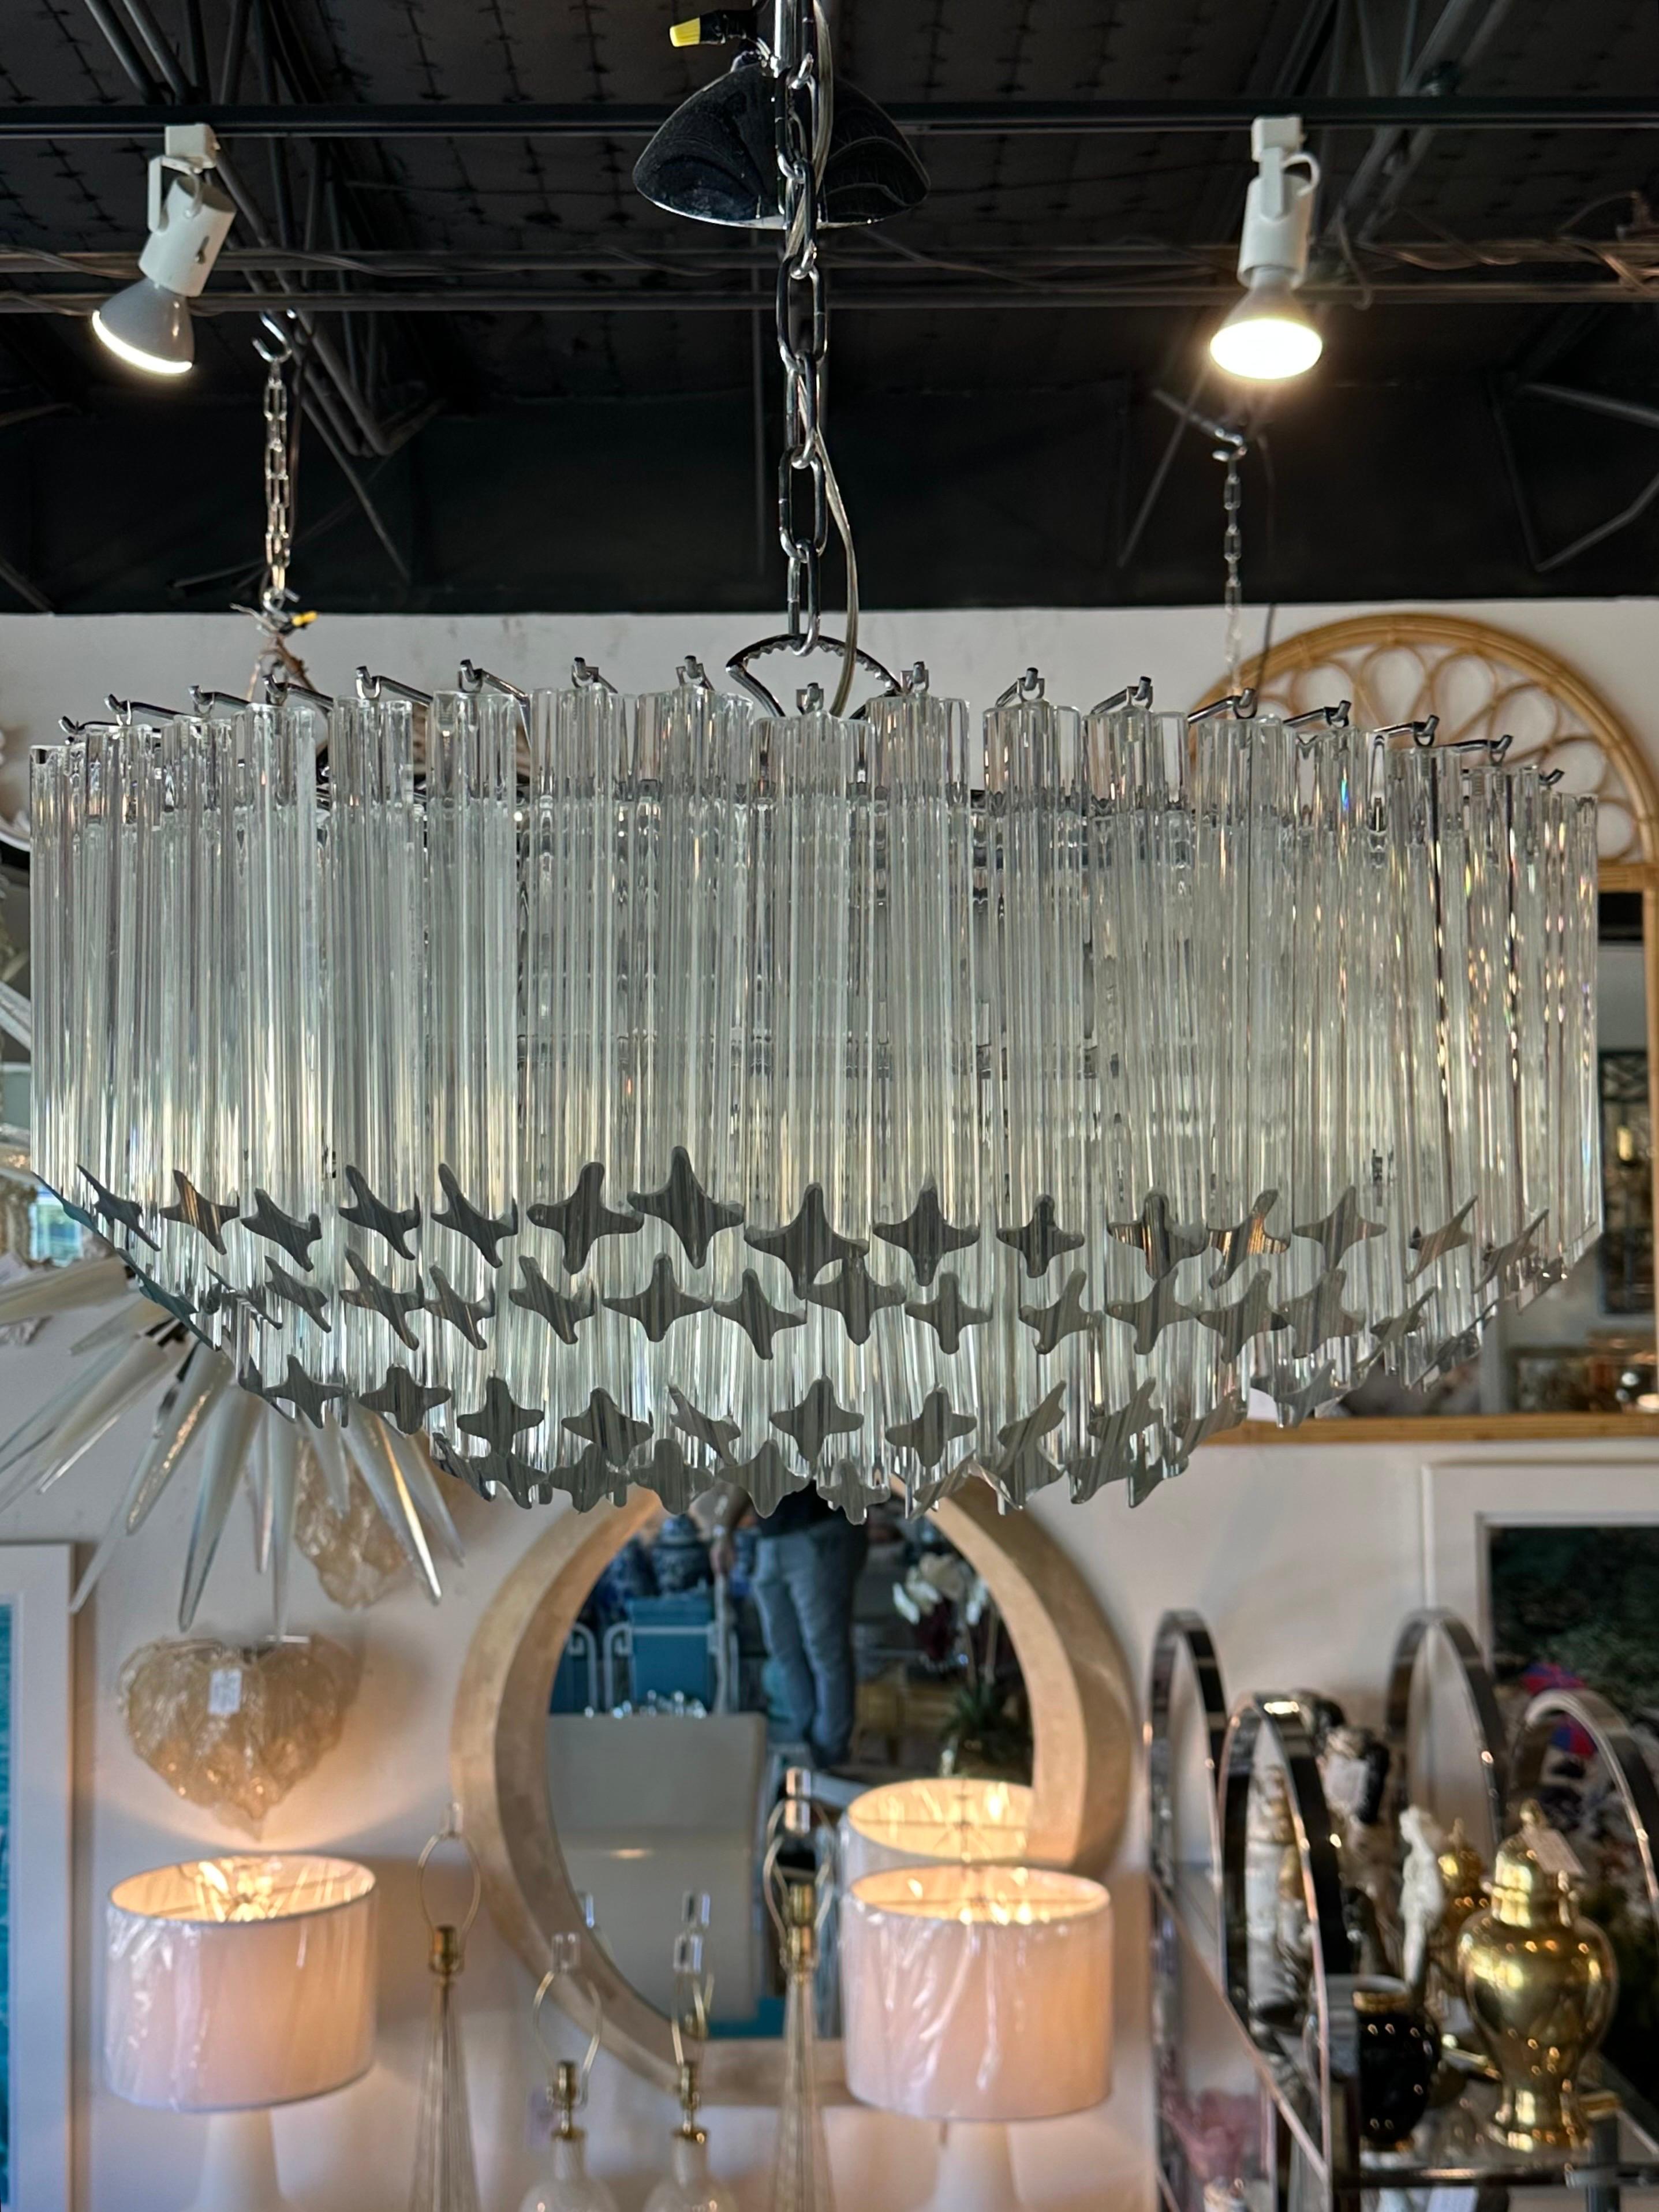 Vintage 1970s Camer Murano Quatrefoil (4 sided glass), 4 tier chandelier. Chrome cage and original ceiling canopy. Holds 4 large size light bulbs. No chips or breaks to any of the glass pieces. Dimensions which do not include the chain length,